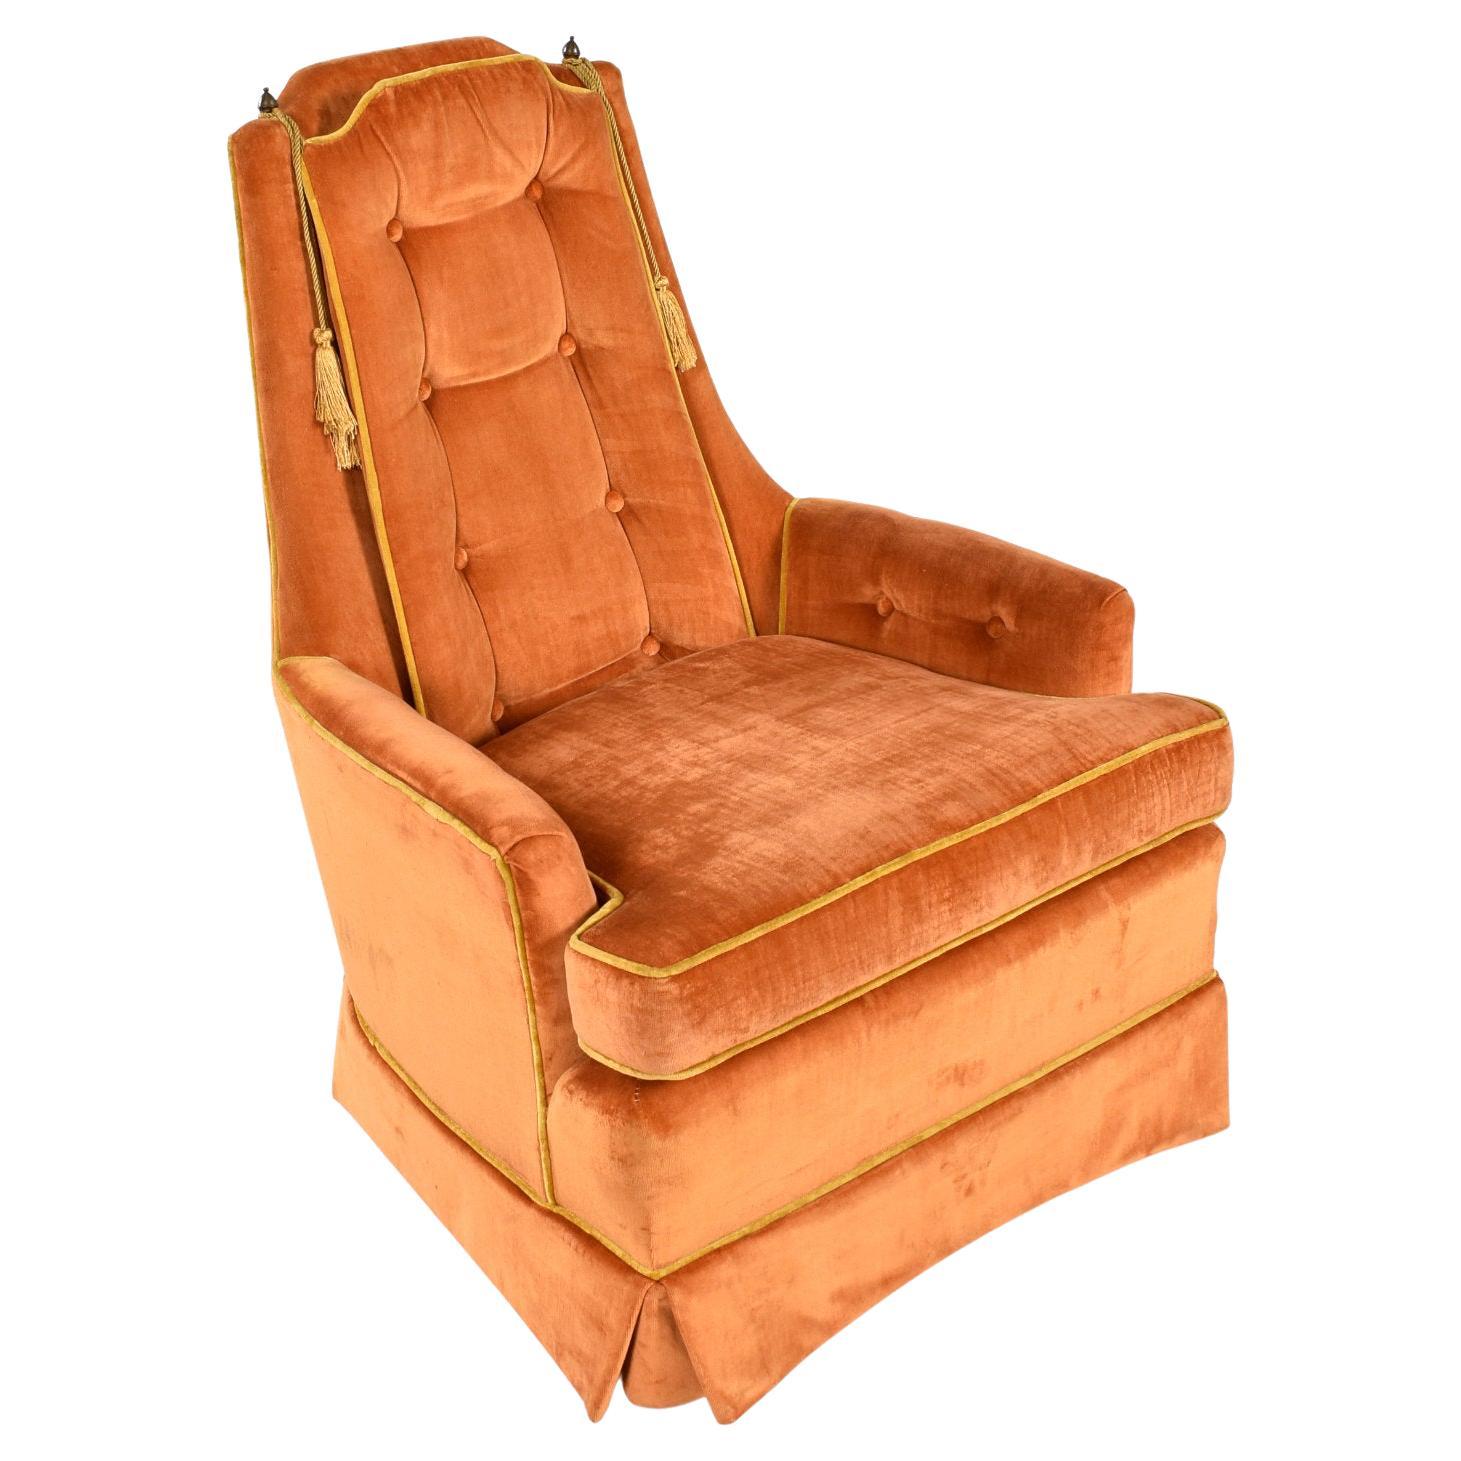 Exceptional pair of original vintage 1970s tufted armchairs by McAfee. These time capsule quality chairs feature their original orange velvet fabric. The color and style is oh-so 70s! If you’ve seen the movie “Dumb and Dumber” you might liken these